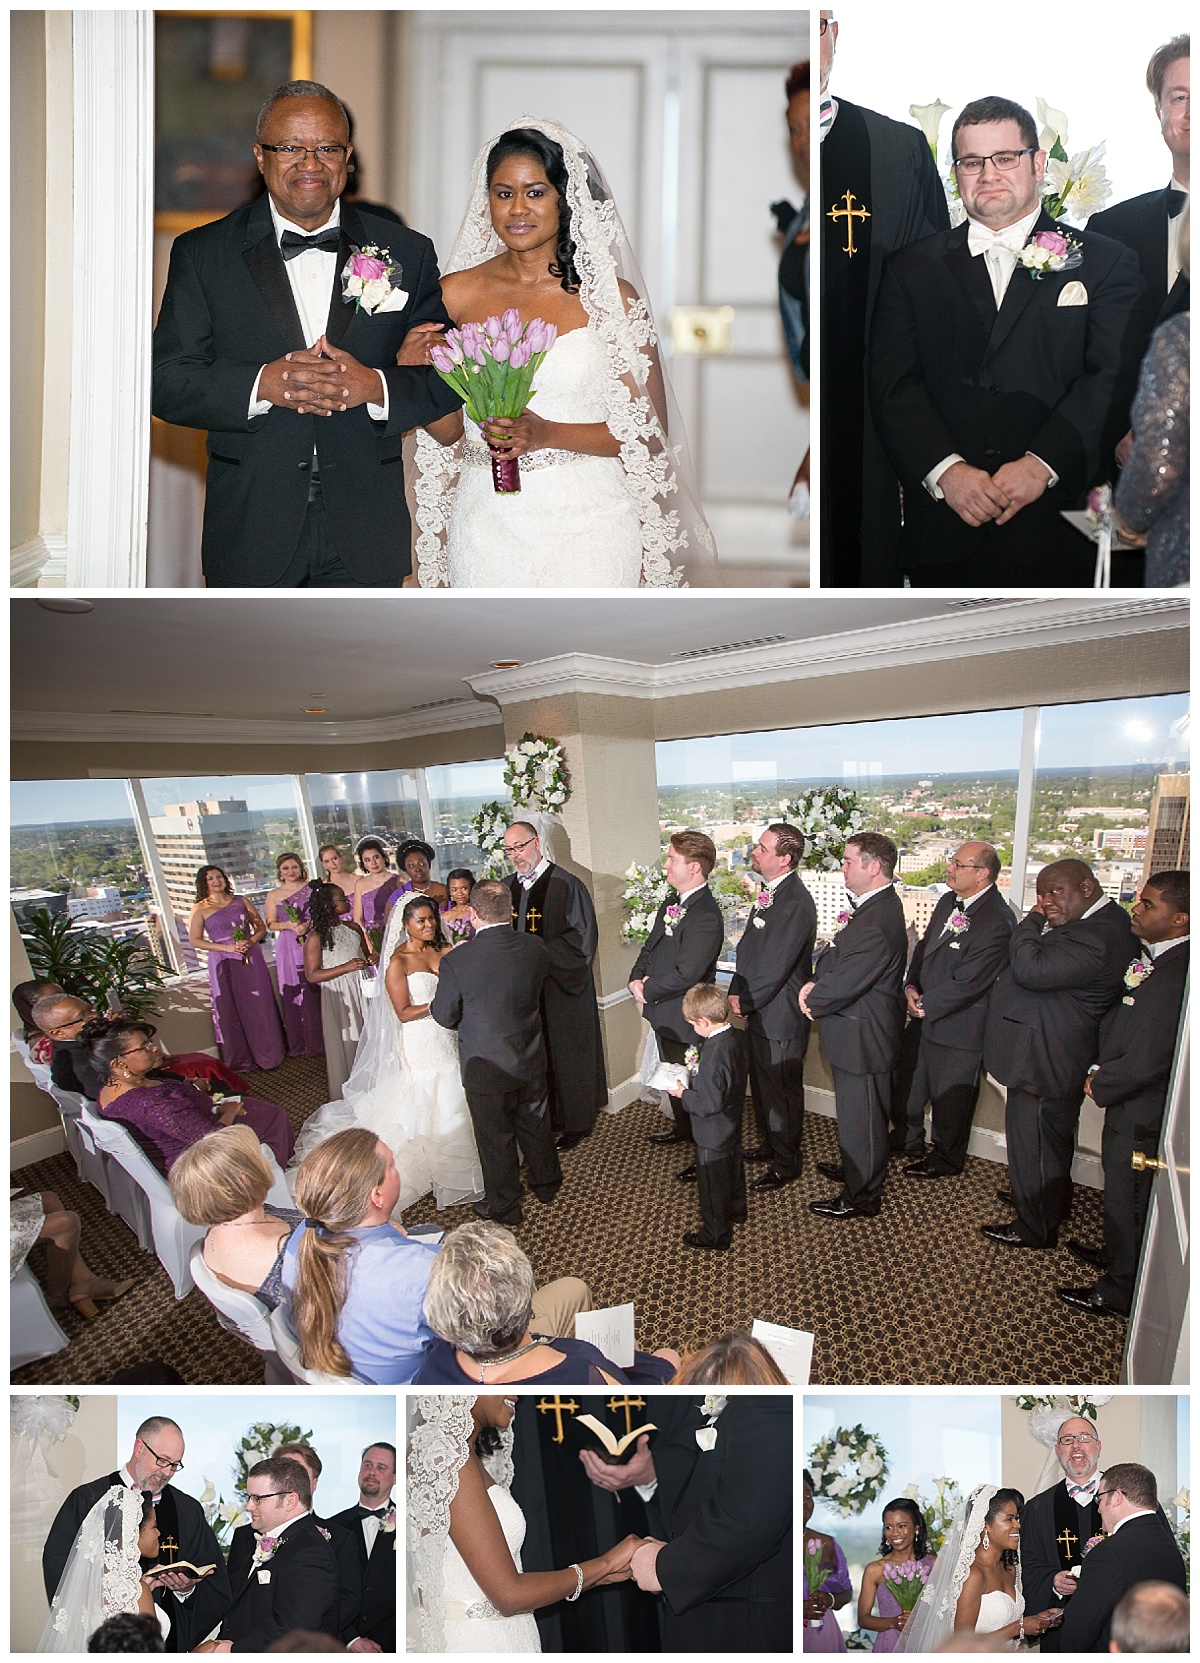 Downtown wedding ceremony at the Capital City Club